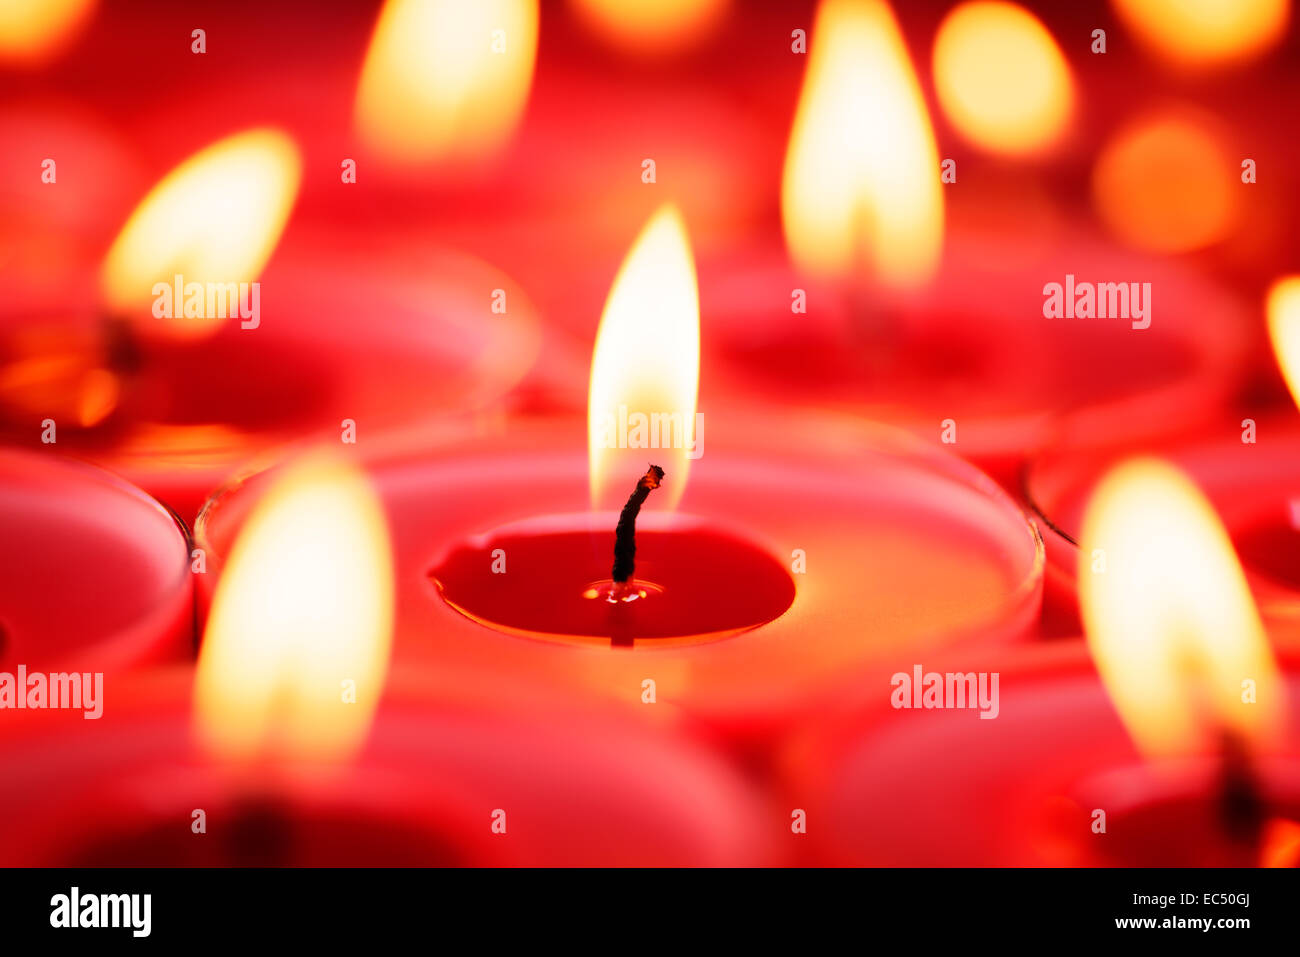 Backgrounds and textures: close-up shot of burning red candles, selective focus, holiday or celebration background Stock Photo